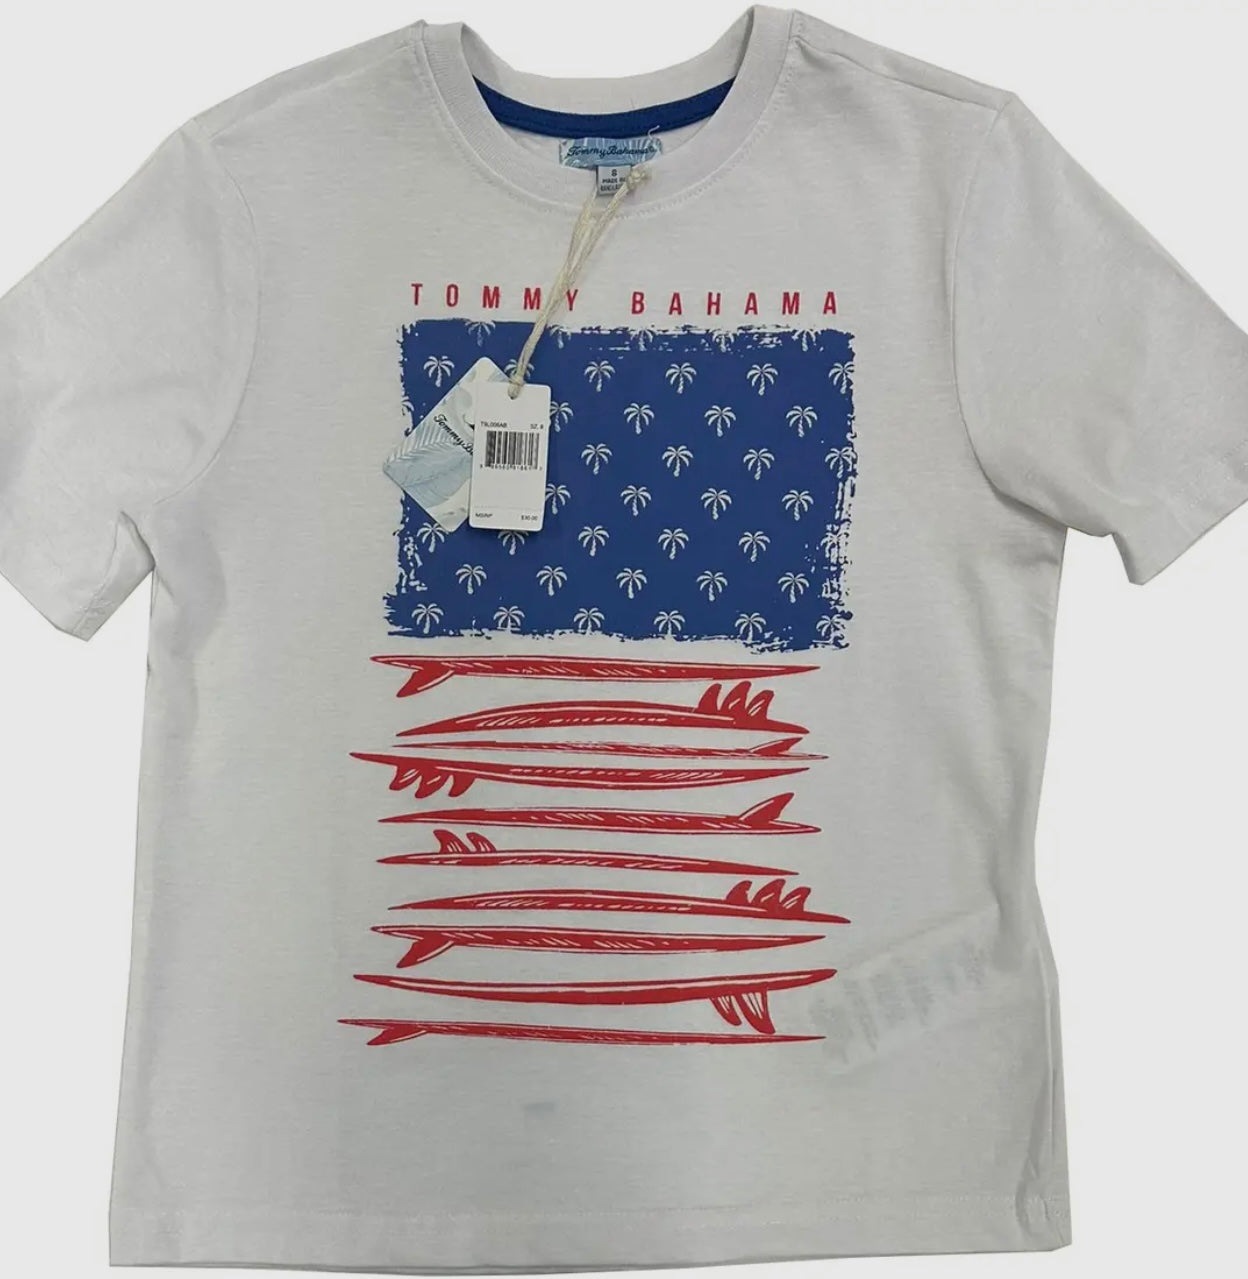 Tommy Bahama red, white, and blue t-shirt